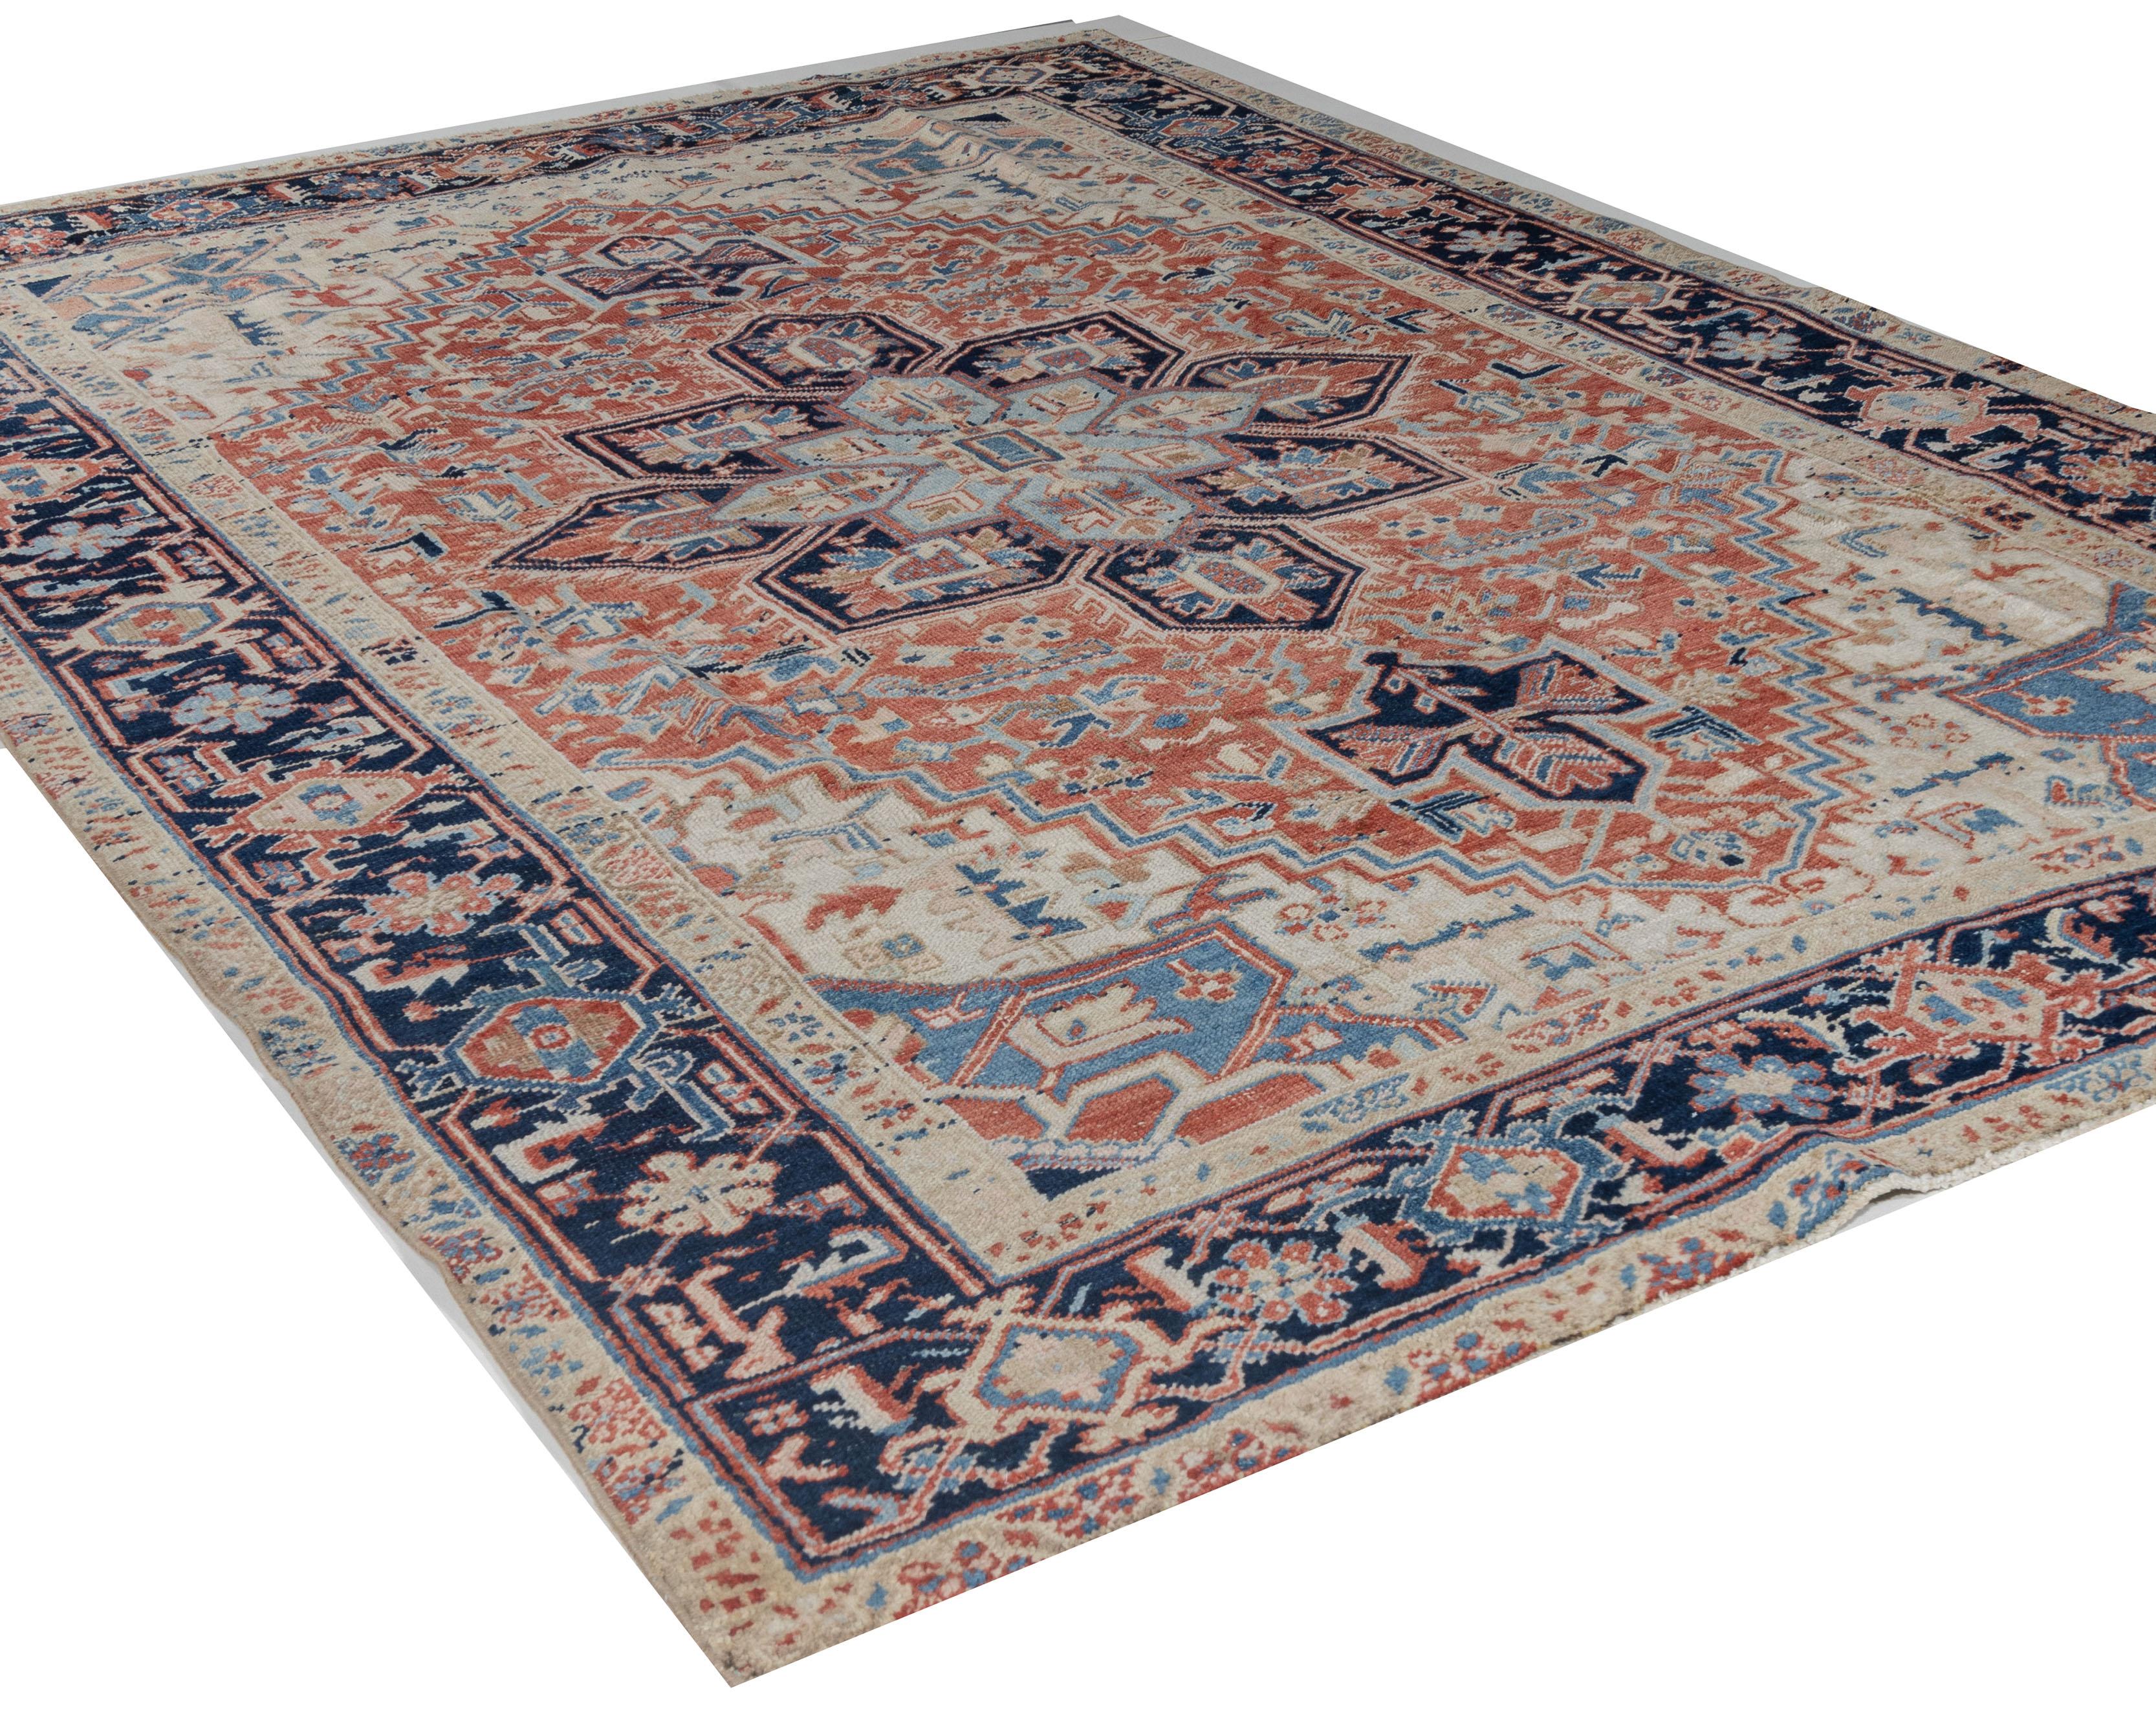 Vintage Persian Heriz Rug 6'5x9' In Good Condition For Sale In New York, NY